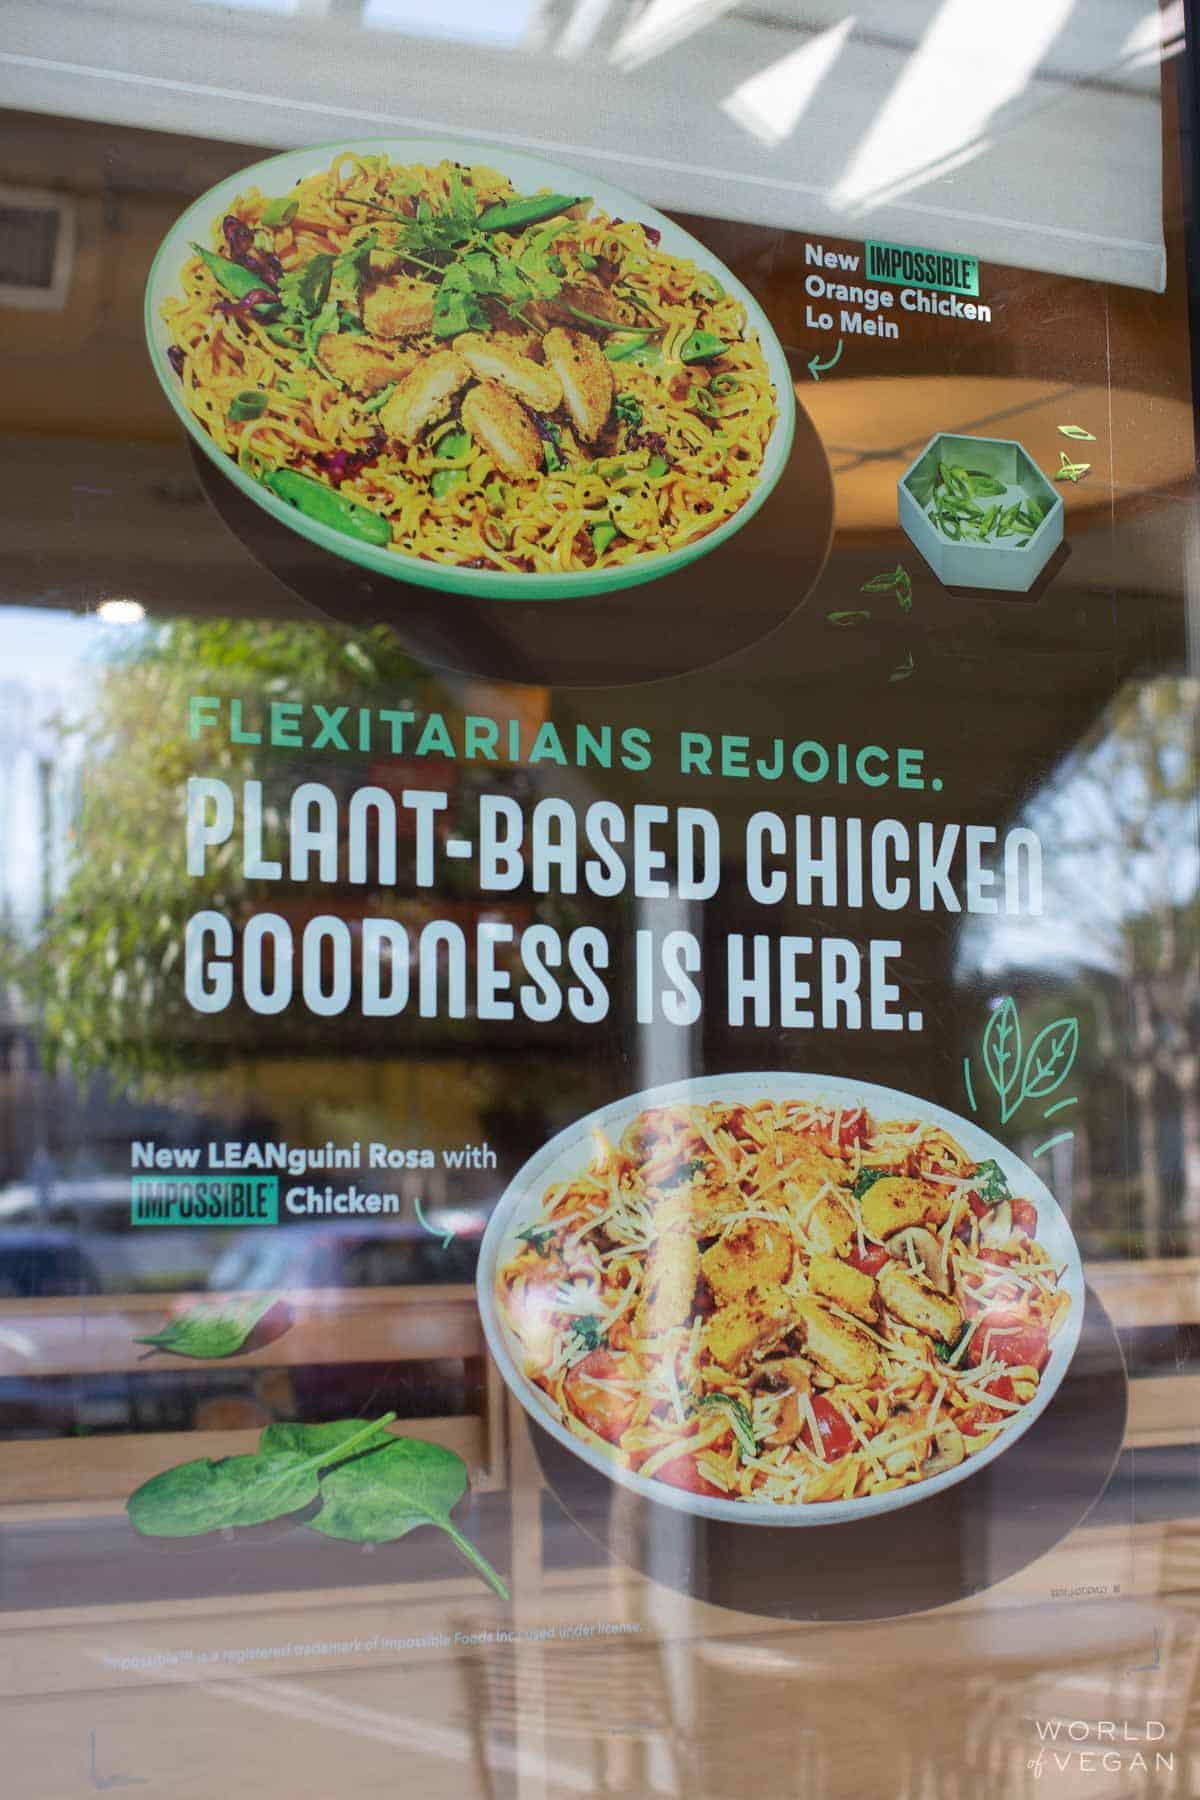 New Plant Based Impossible Chicken Sign in Noodles & Company Window